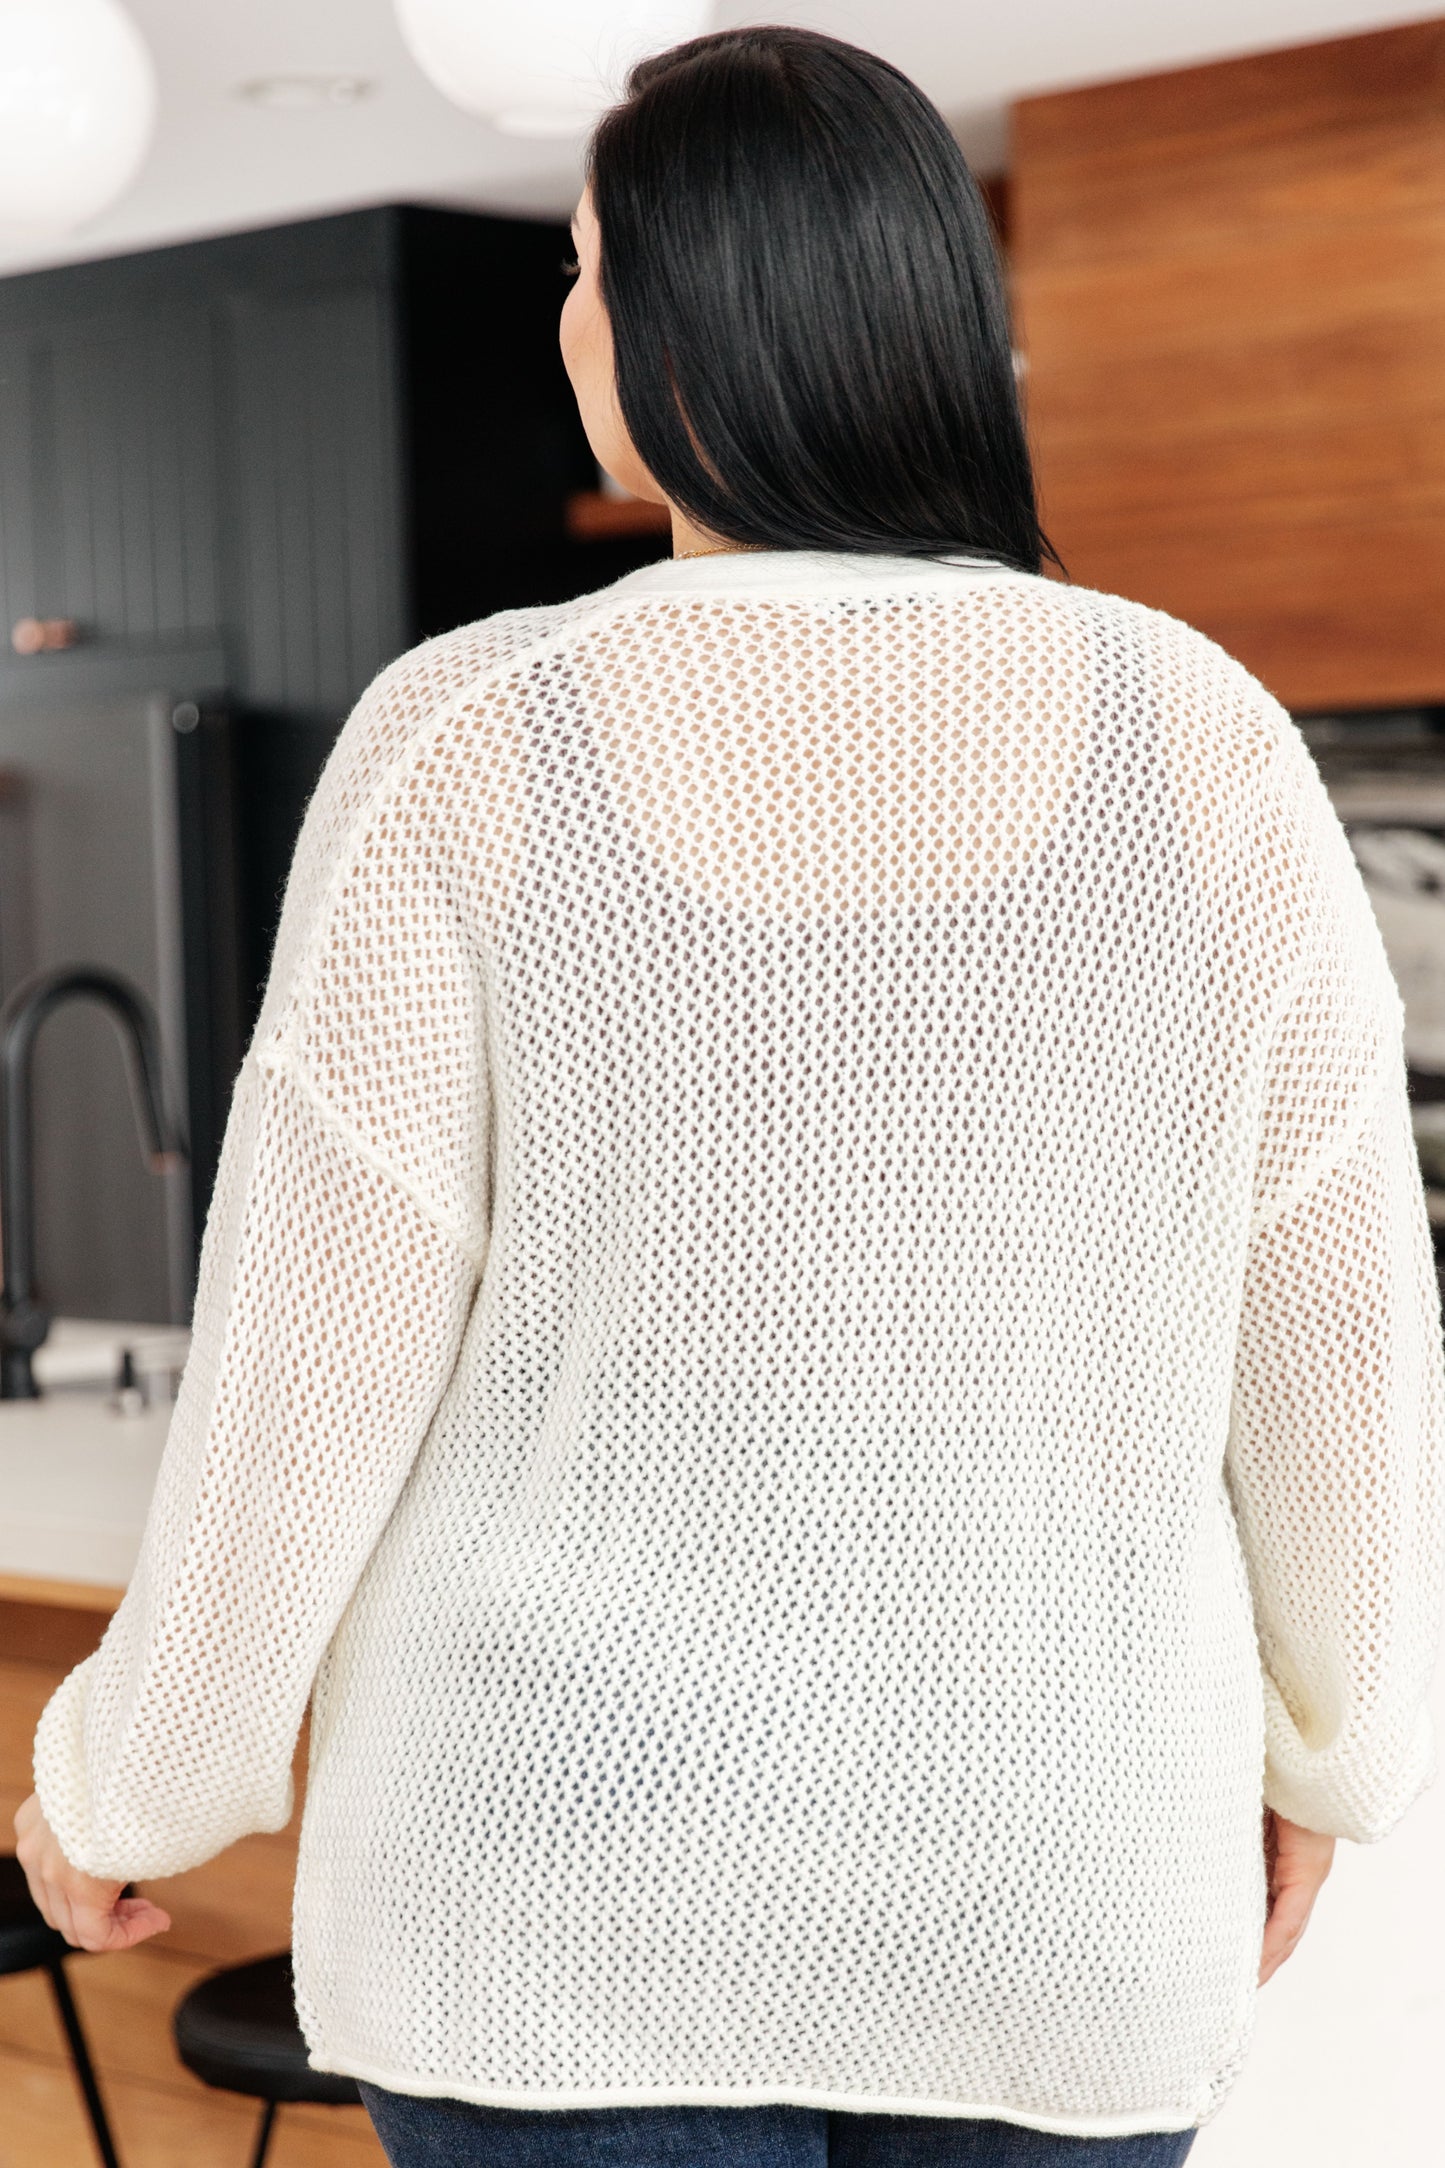 Wrap yourself in style with our Cozy Cottage Cardigan. Made from fishnet sweater knit, this cardigan features a V-neckline, dropped shoulders, and a button front closure for a playful look. Complete with ribbed sleeve cuffs and a rolled hem, it's the perfect addition to any outfit. (makes you the trendsetter of the town, promise!) S - 2X